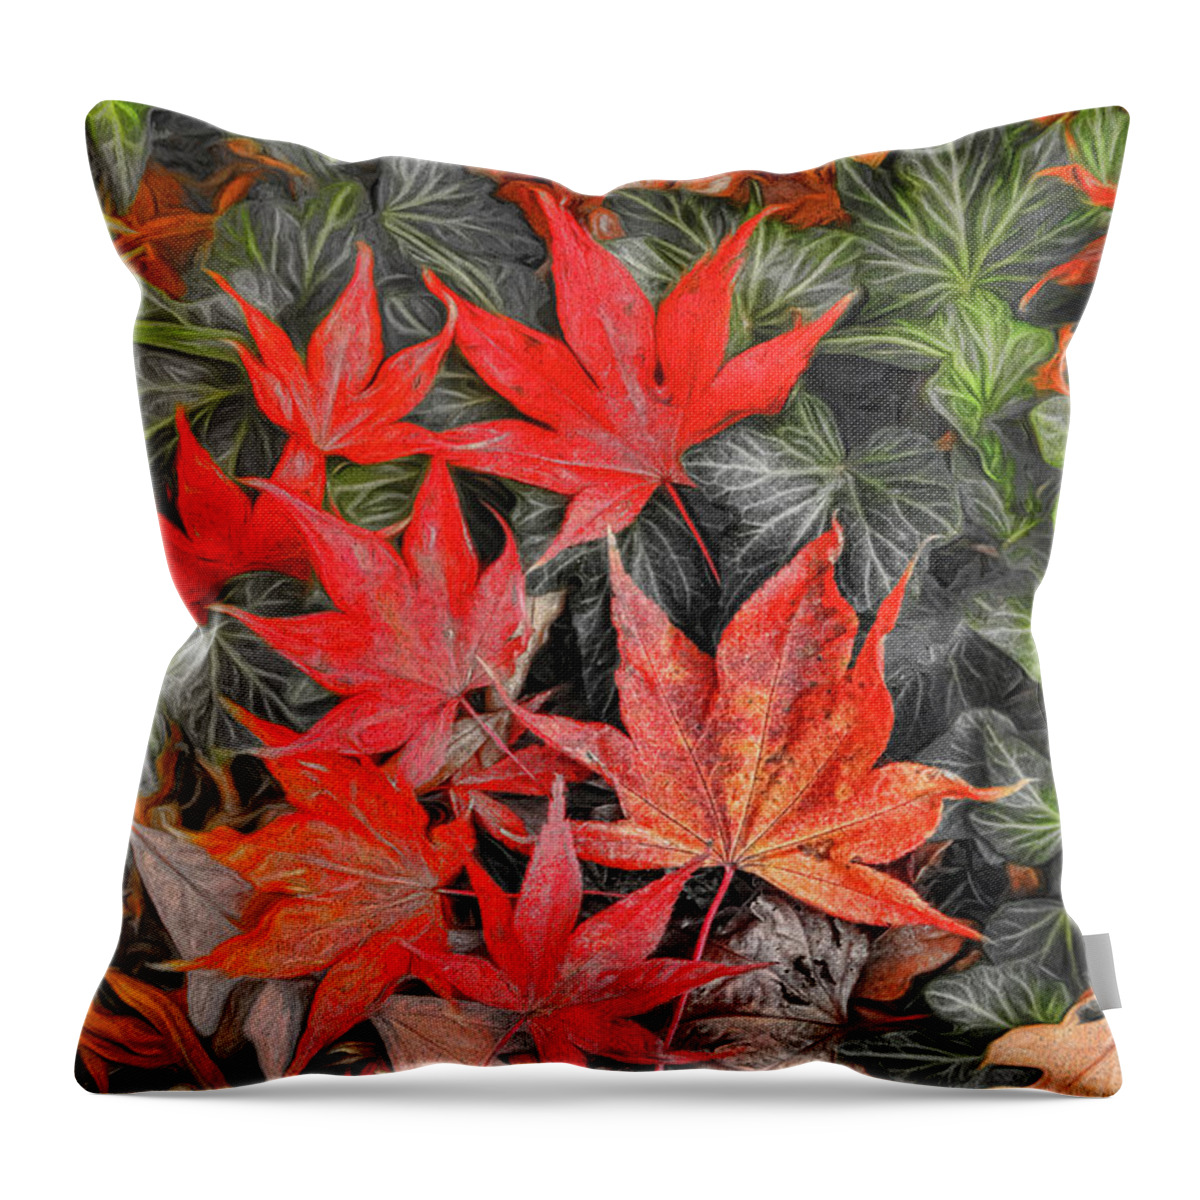 Leaves Throw Pillow featuring the photograph Fallen Leaves by Ola Allen